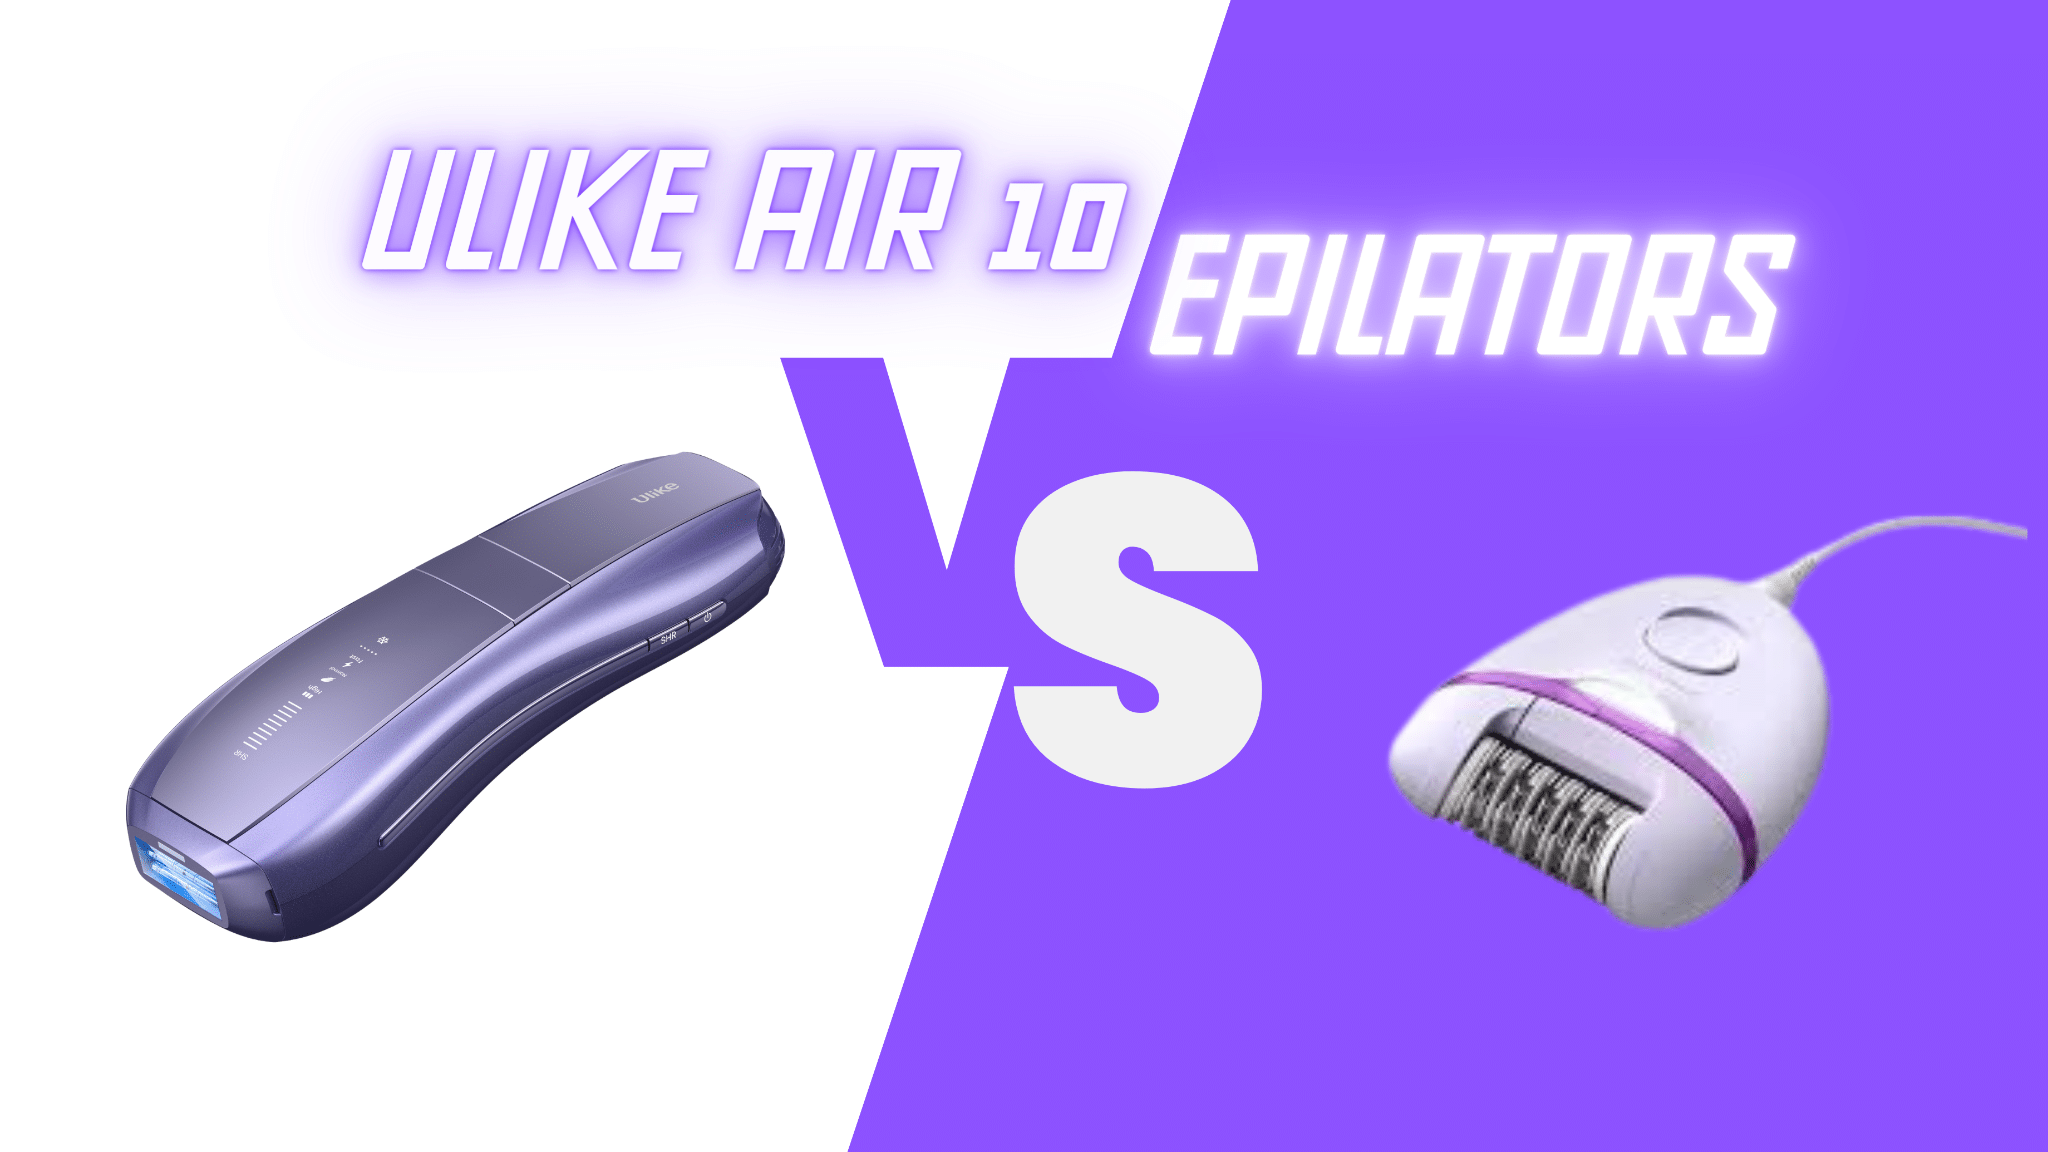 Ulike Air 10 vs Epilators: What’s the Difference?